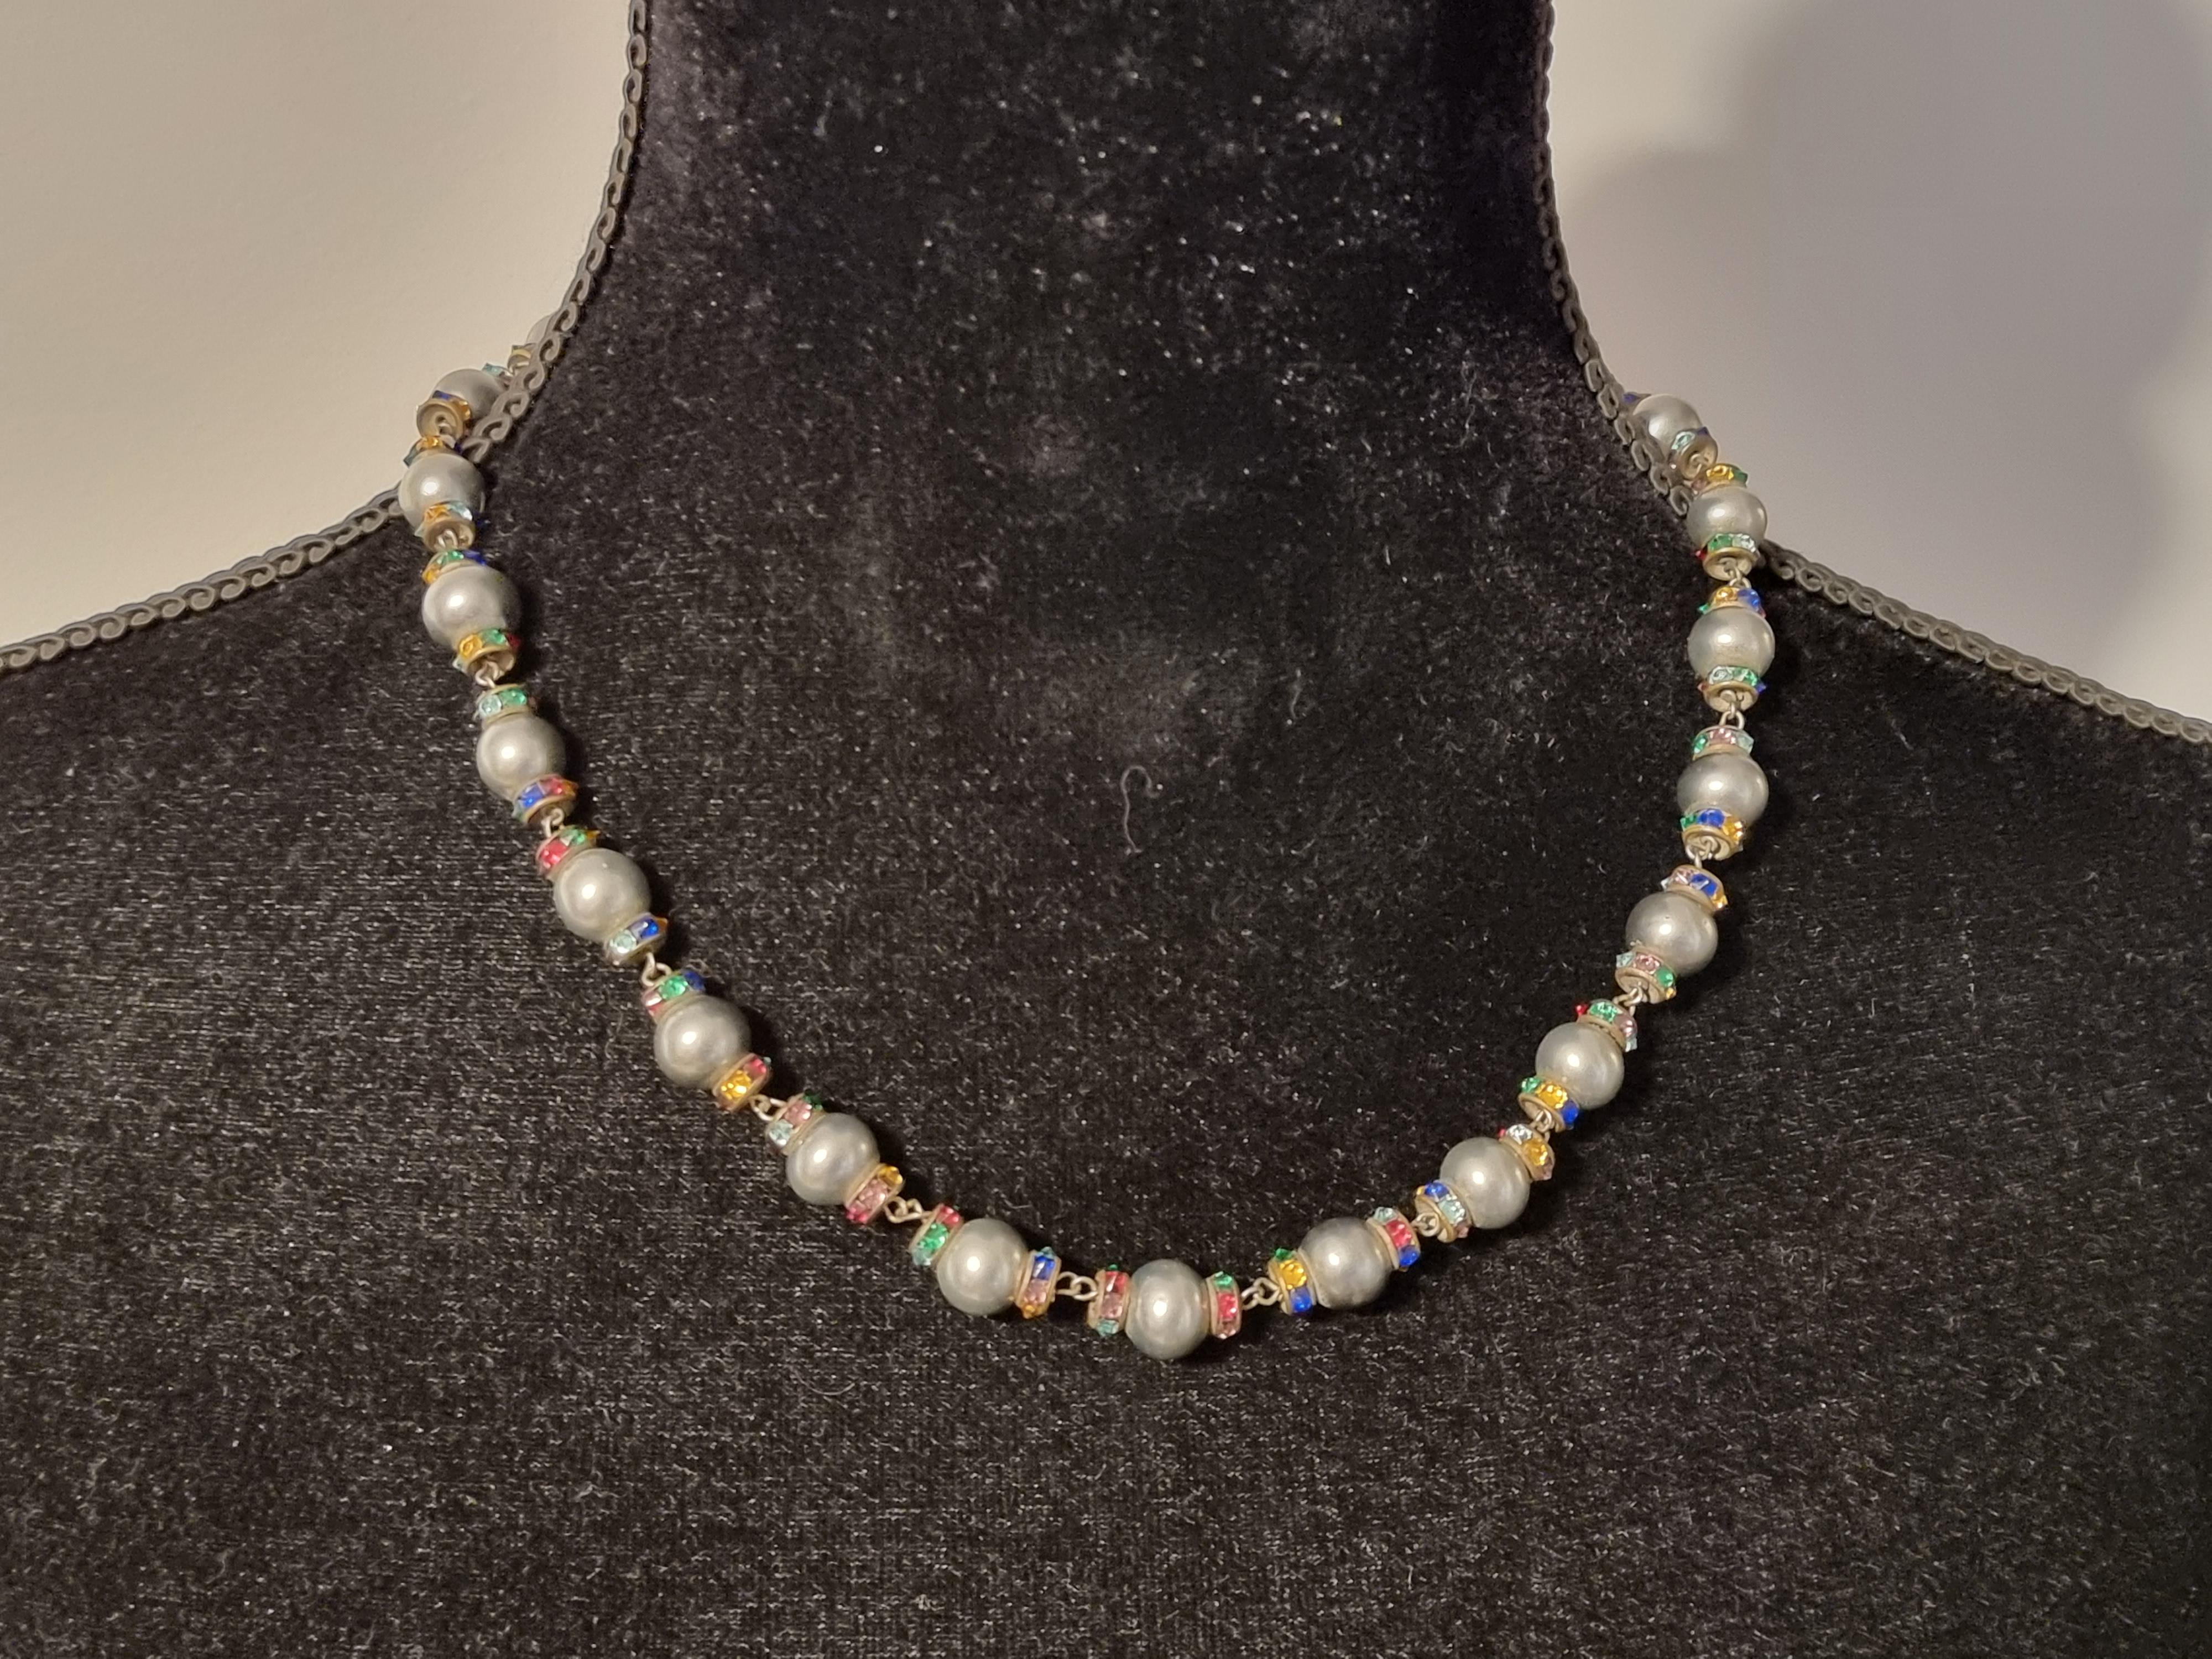 Old CHANEL necklace, Louis Rousselet pearls, rhinestones, vintage from the 40s 8